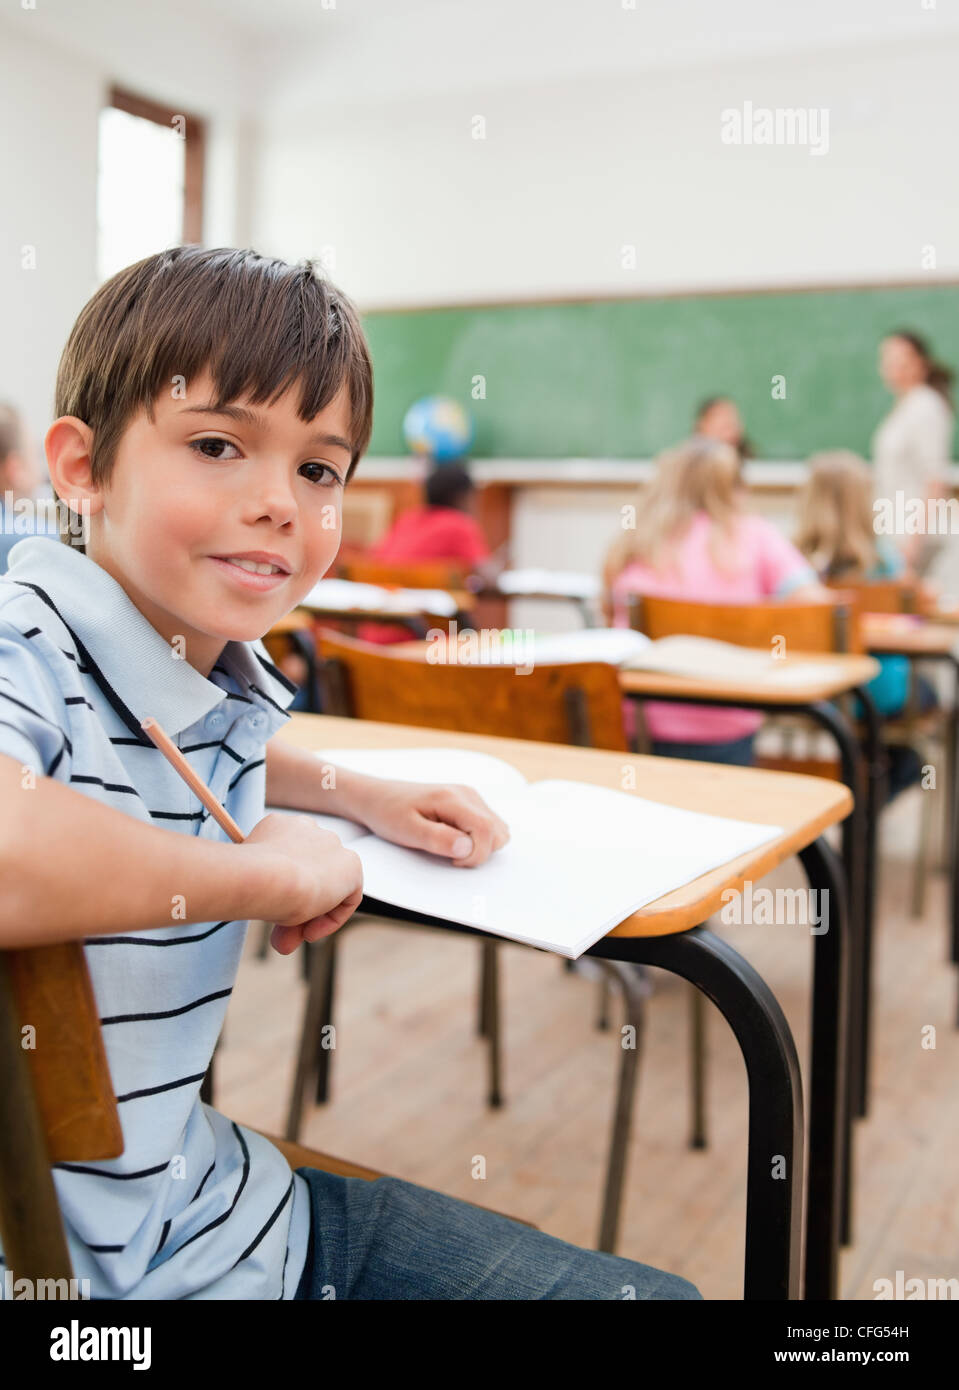 Schoolboy turned around in class Stock Photo